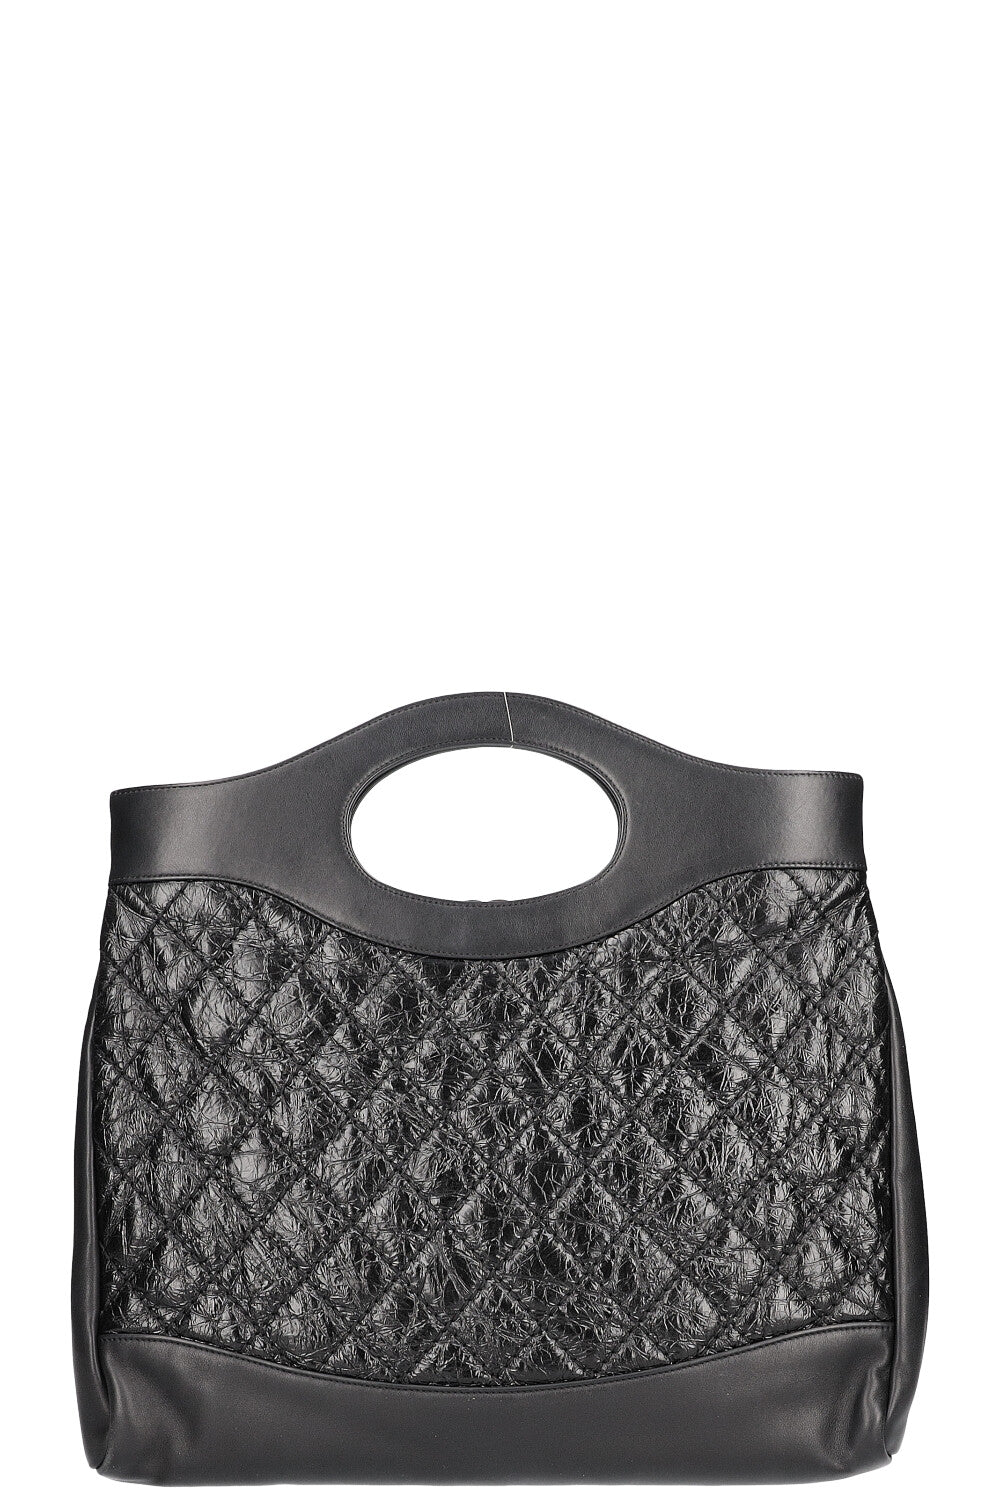 CHANEL 31 Shopping Bag Quilted Calfskin Black